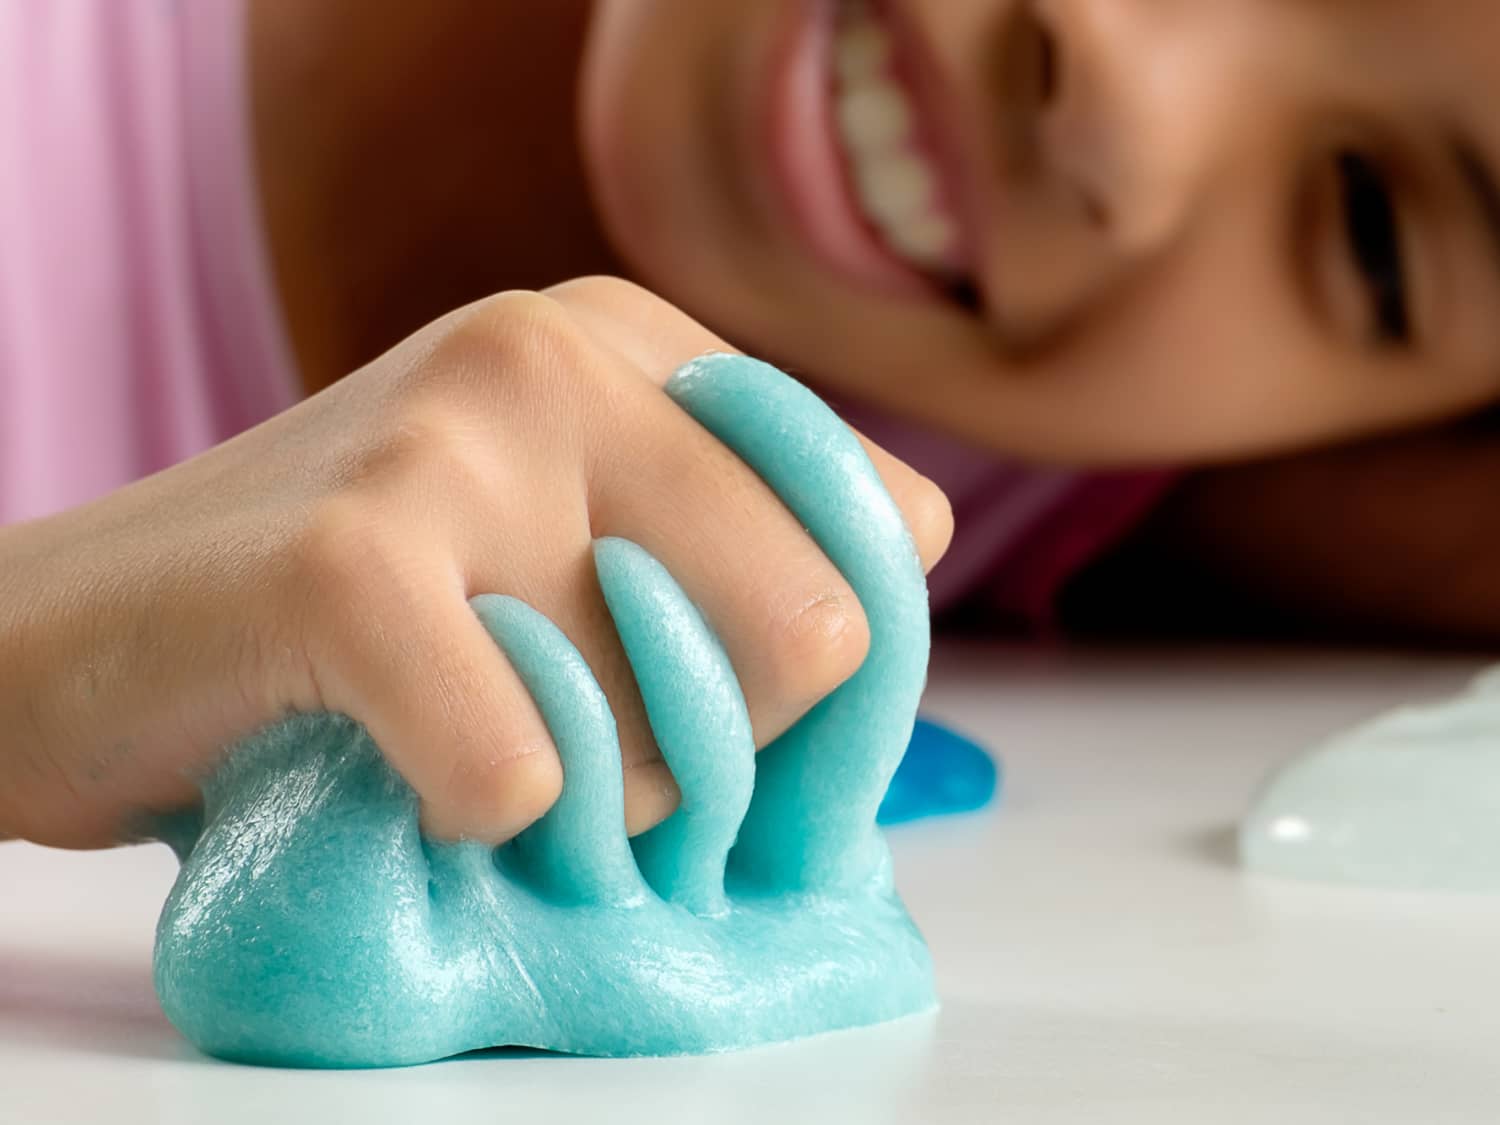 How to Make and Use Cleaning Slime